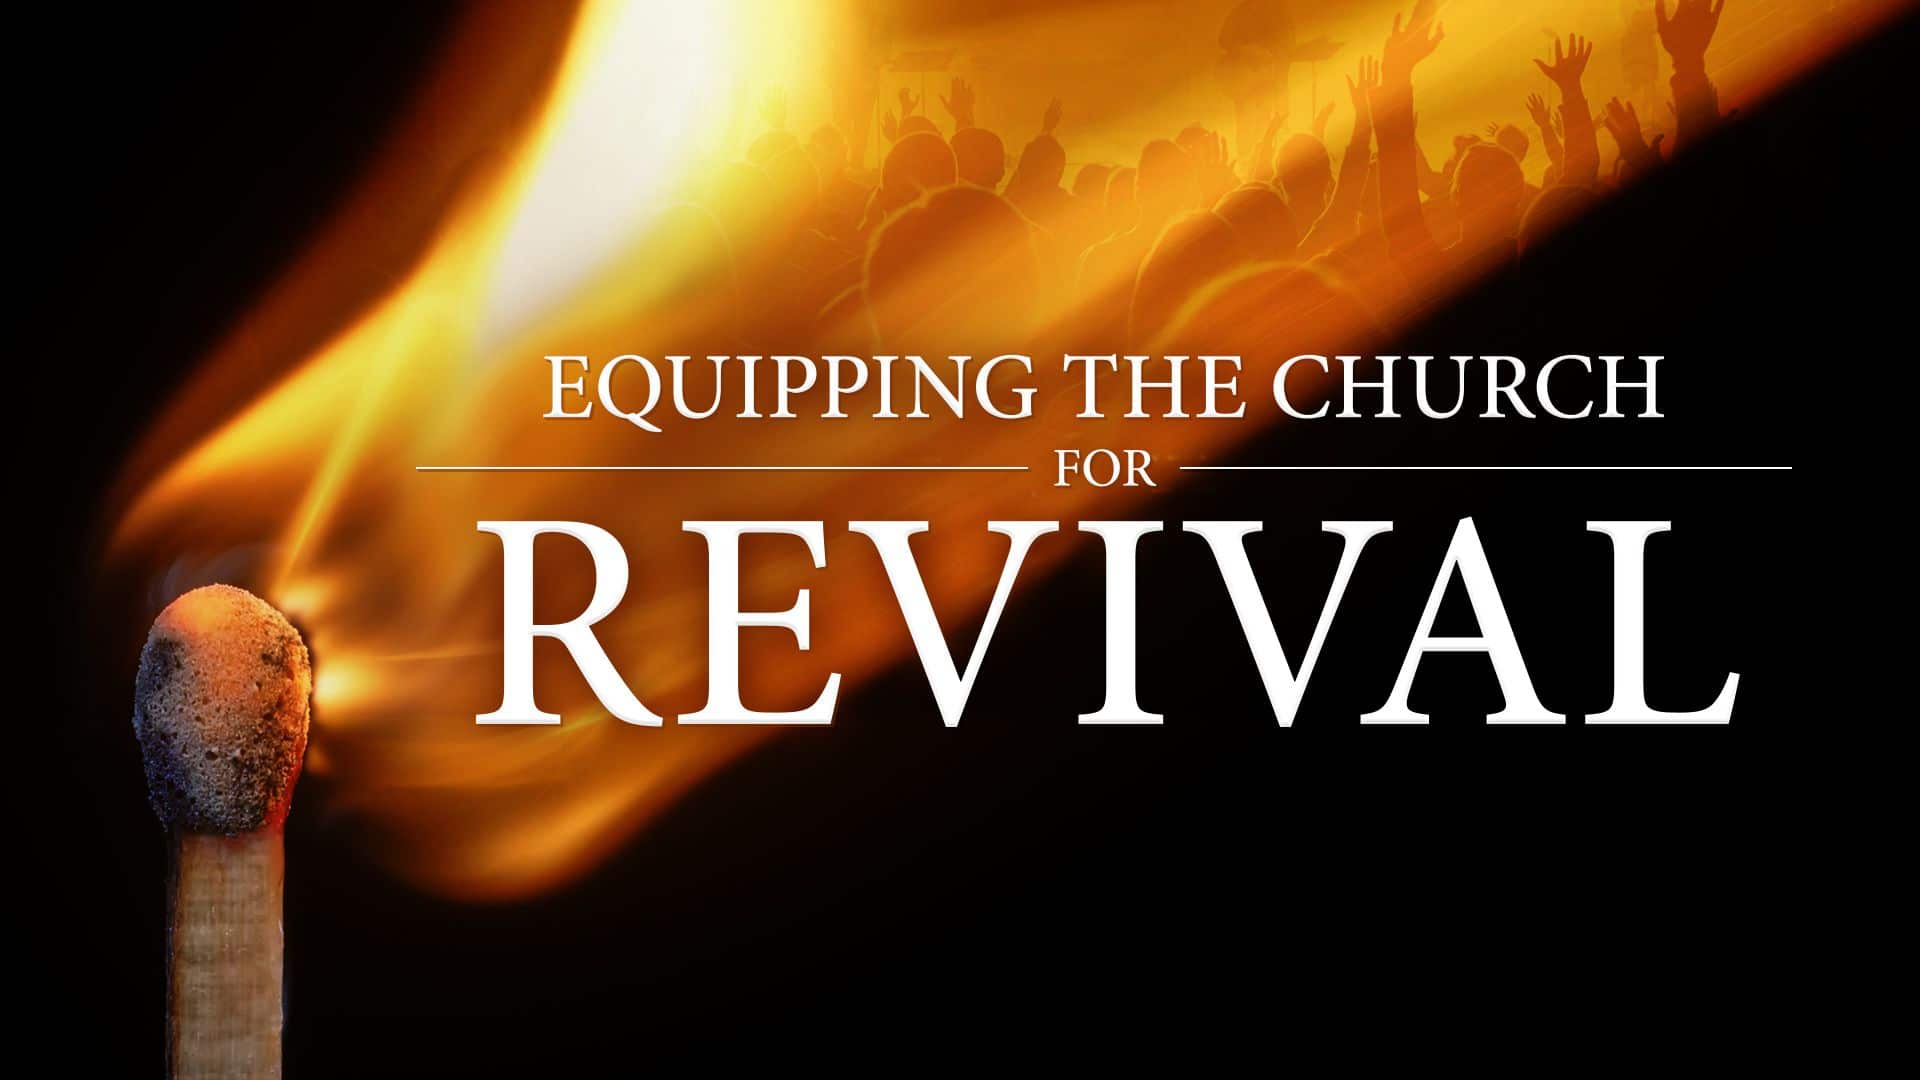 REVIVAL OF THE CHURCH